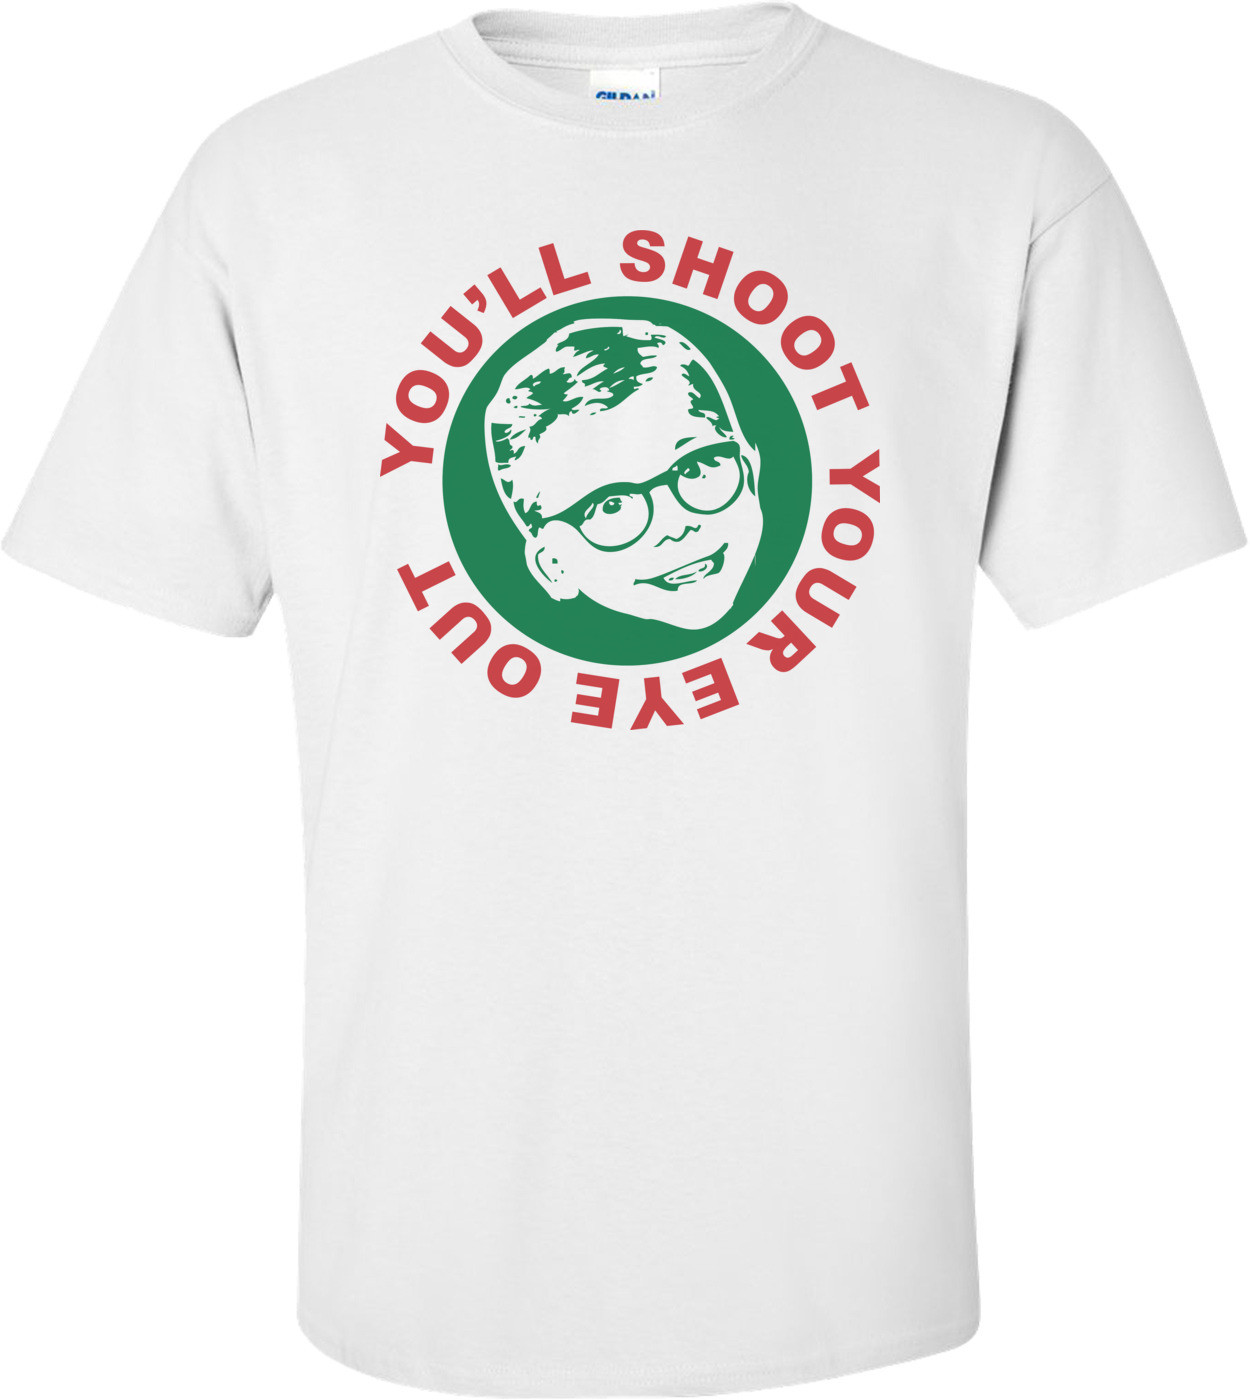 You'll Shoot Your Eye Out - A Christmas Story T-shirt